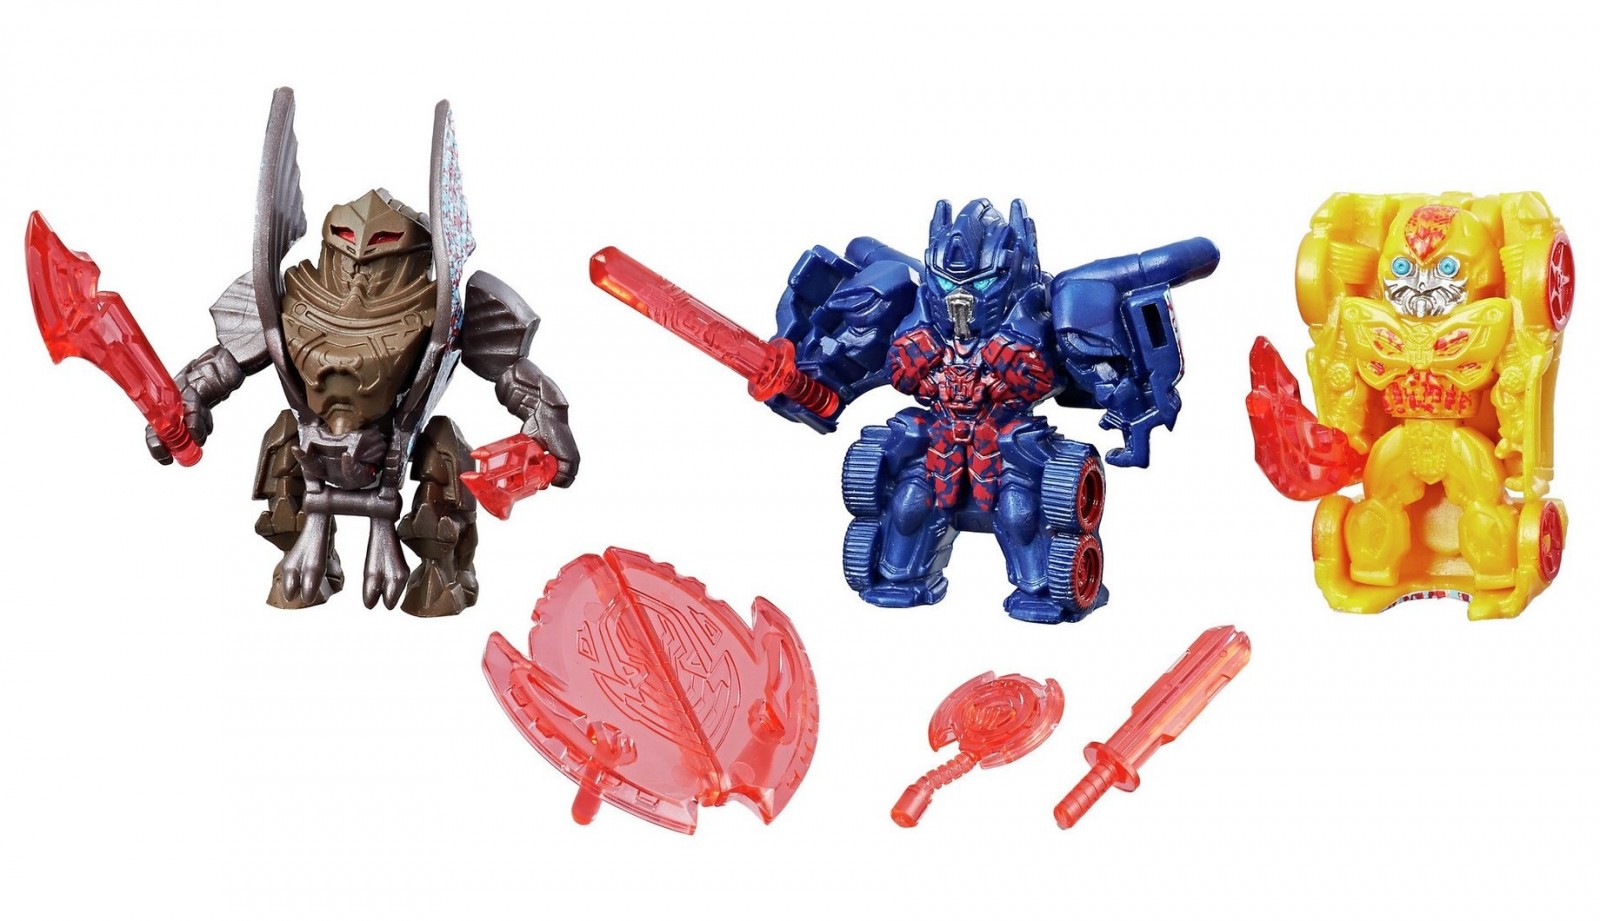 Transformers News: Official Images of Tiny Turbo Changer Steelbane and 3 Pack from Transformers: The Last Knight